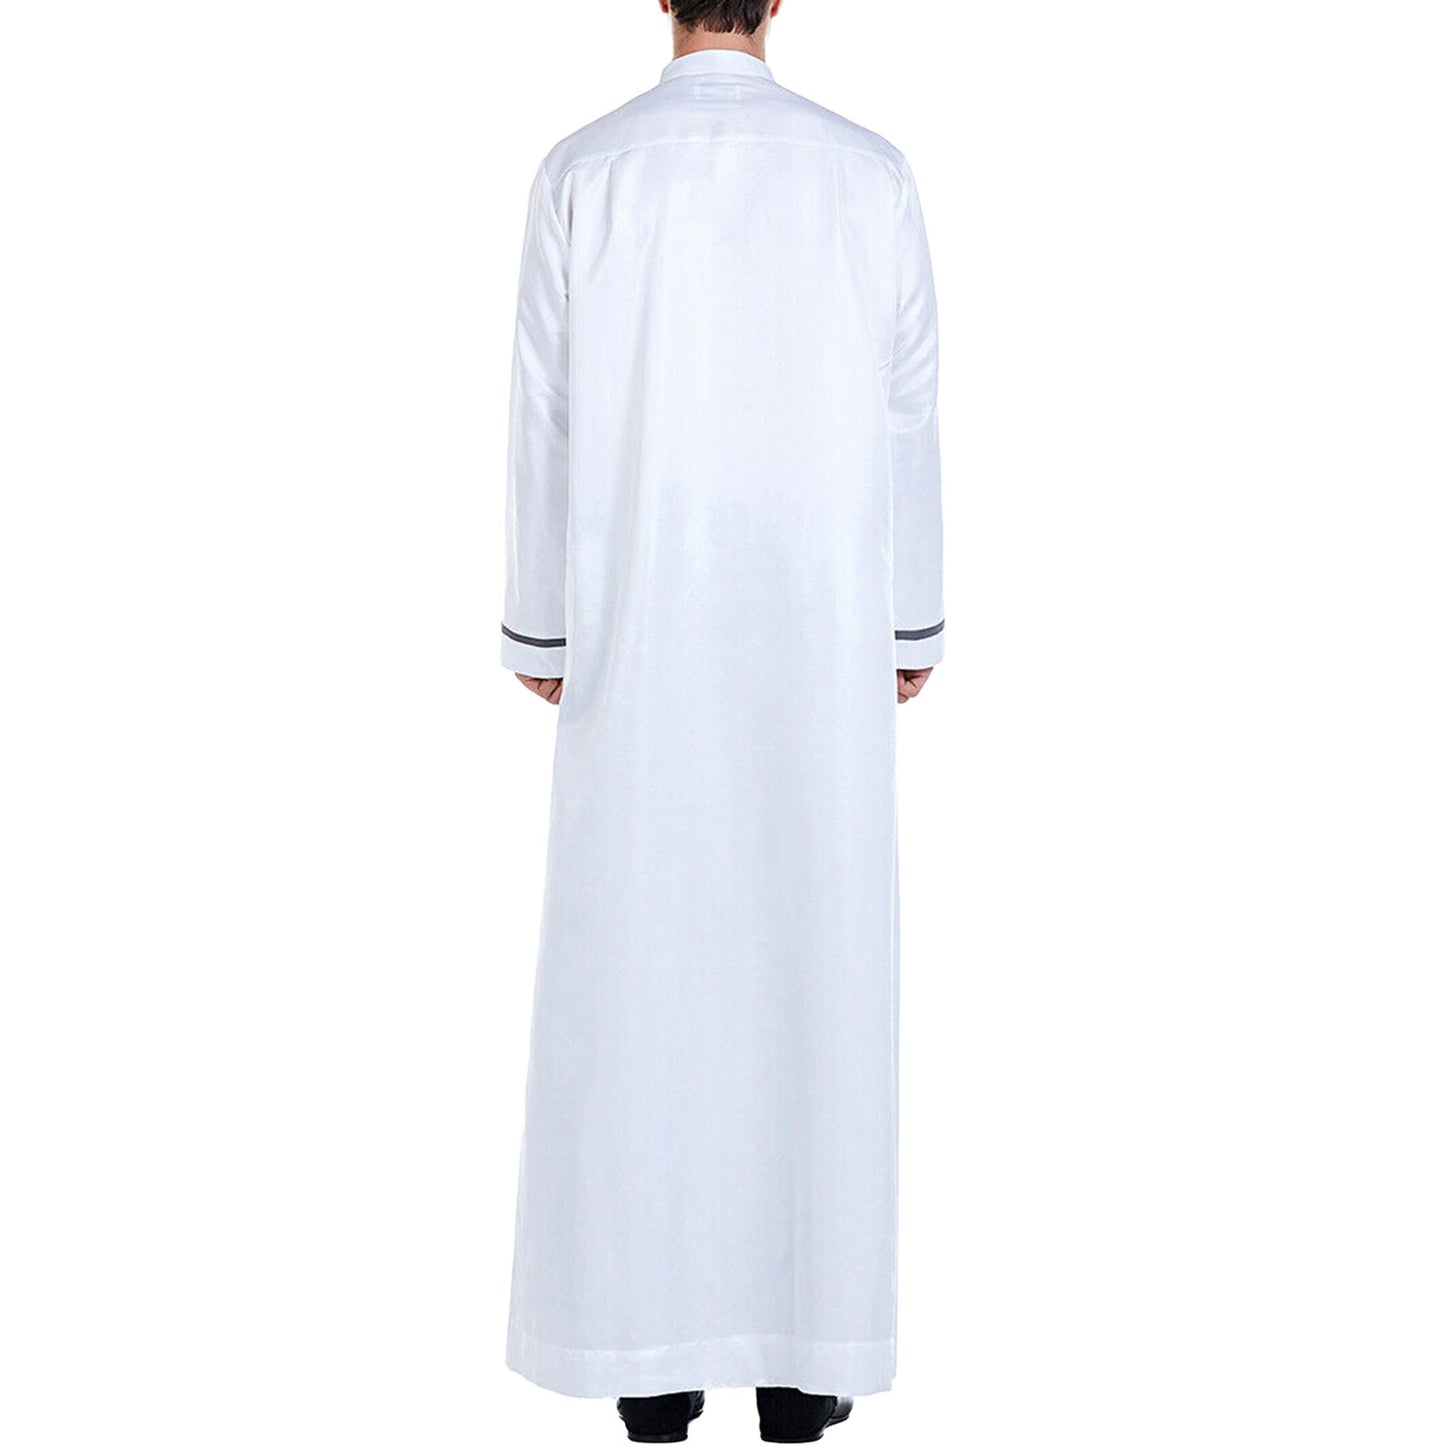 regular fit jubba featuring US size